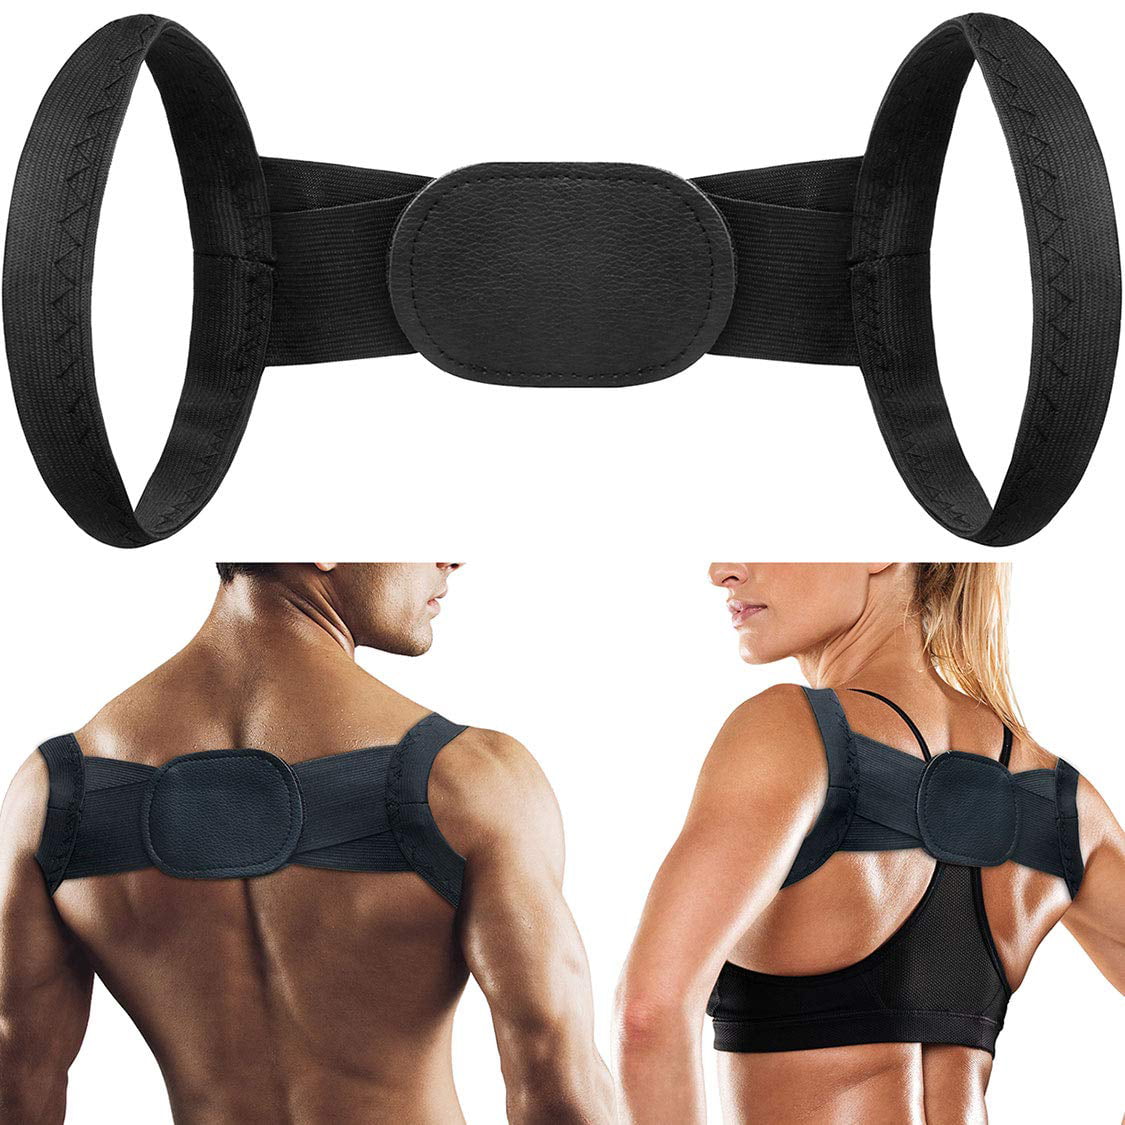 Adjustable to All Body Sizes Details about   Body Wellness Posture Corrector FREE SHIPPING USA 